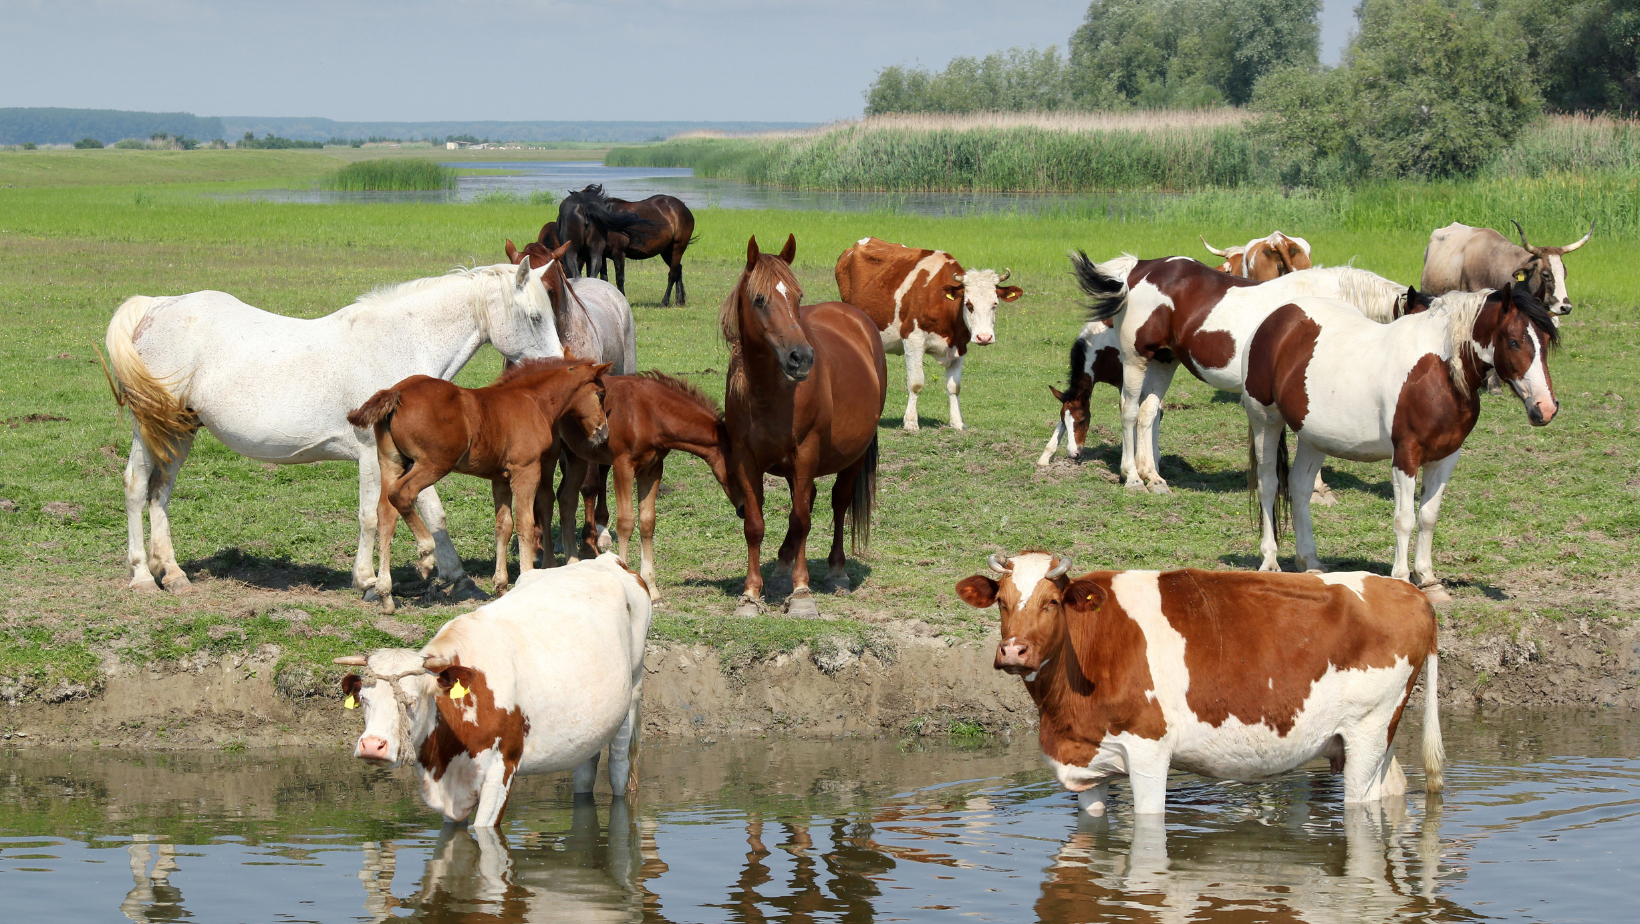 A group of cattle and horses standing together in a field near a pool of water